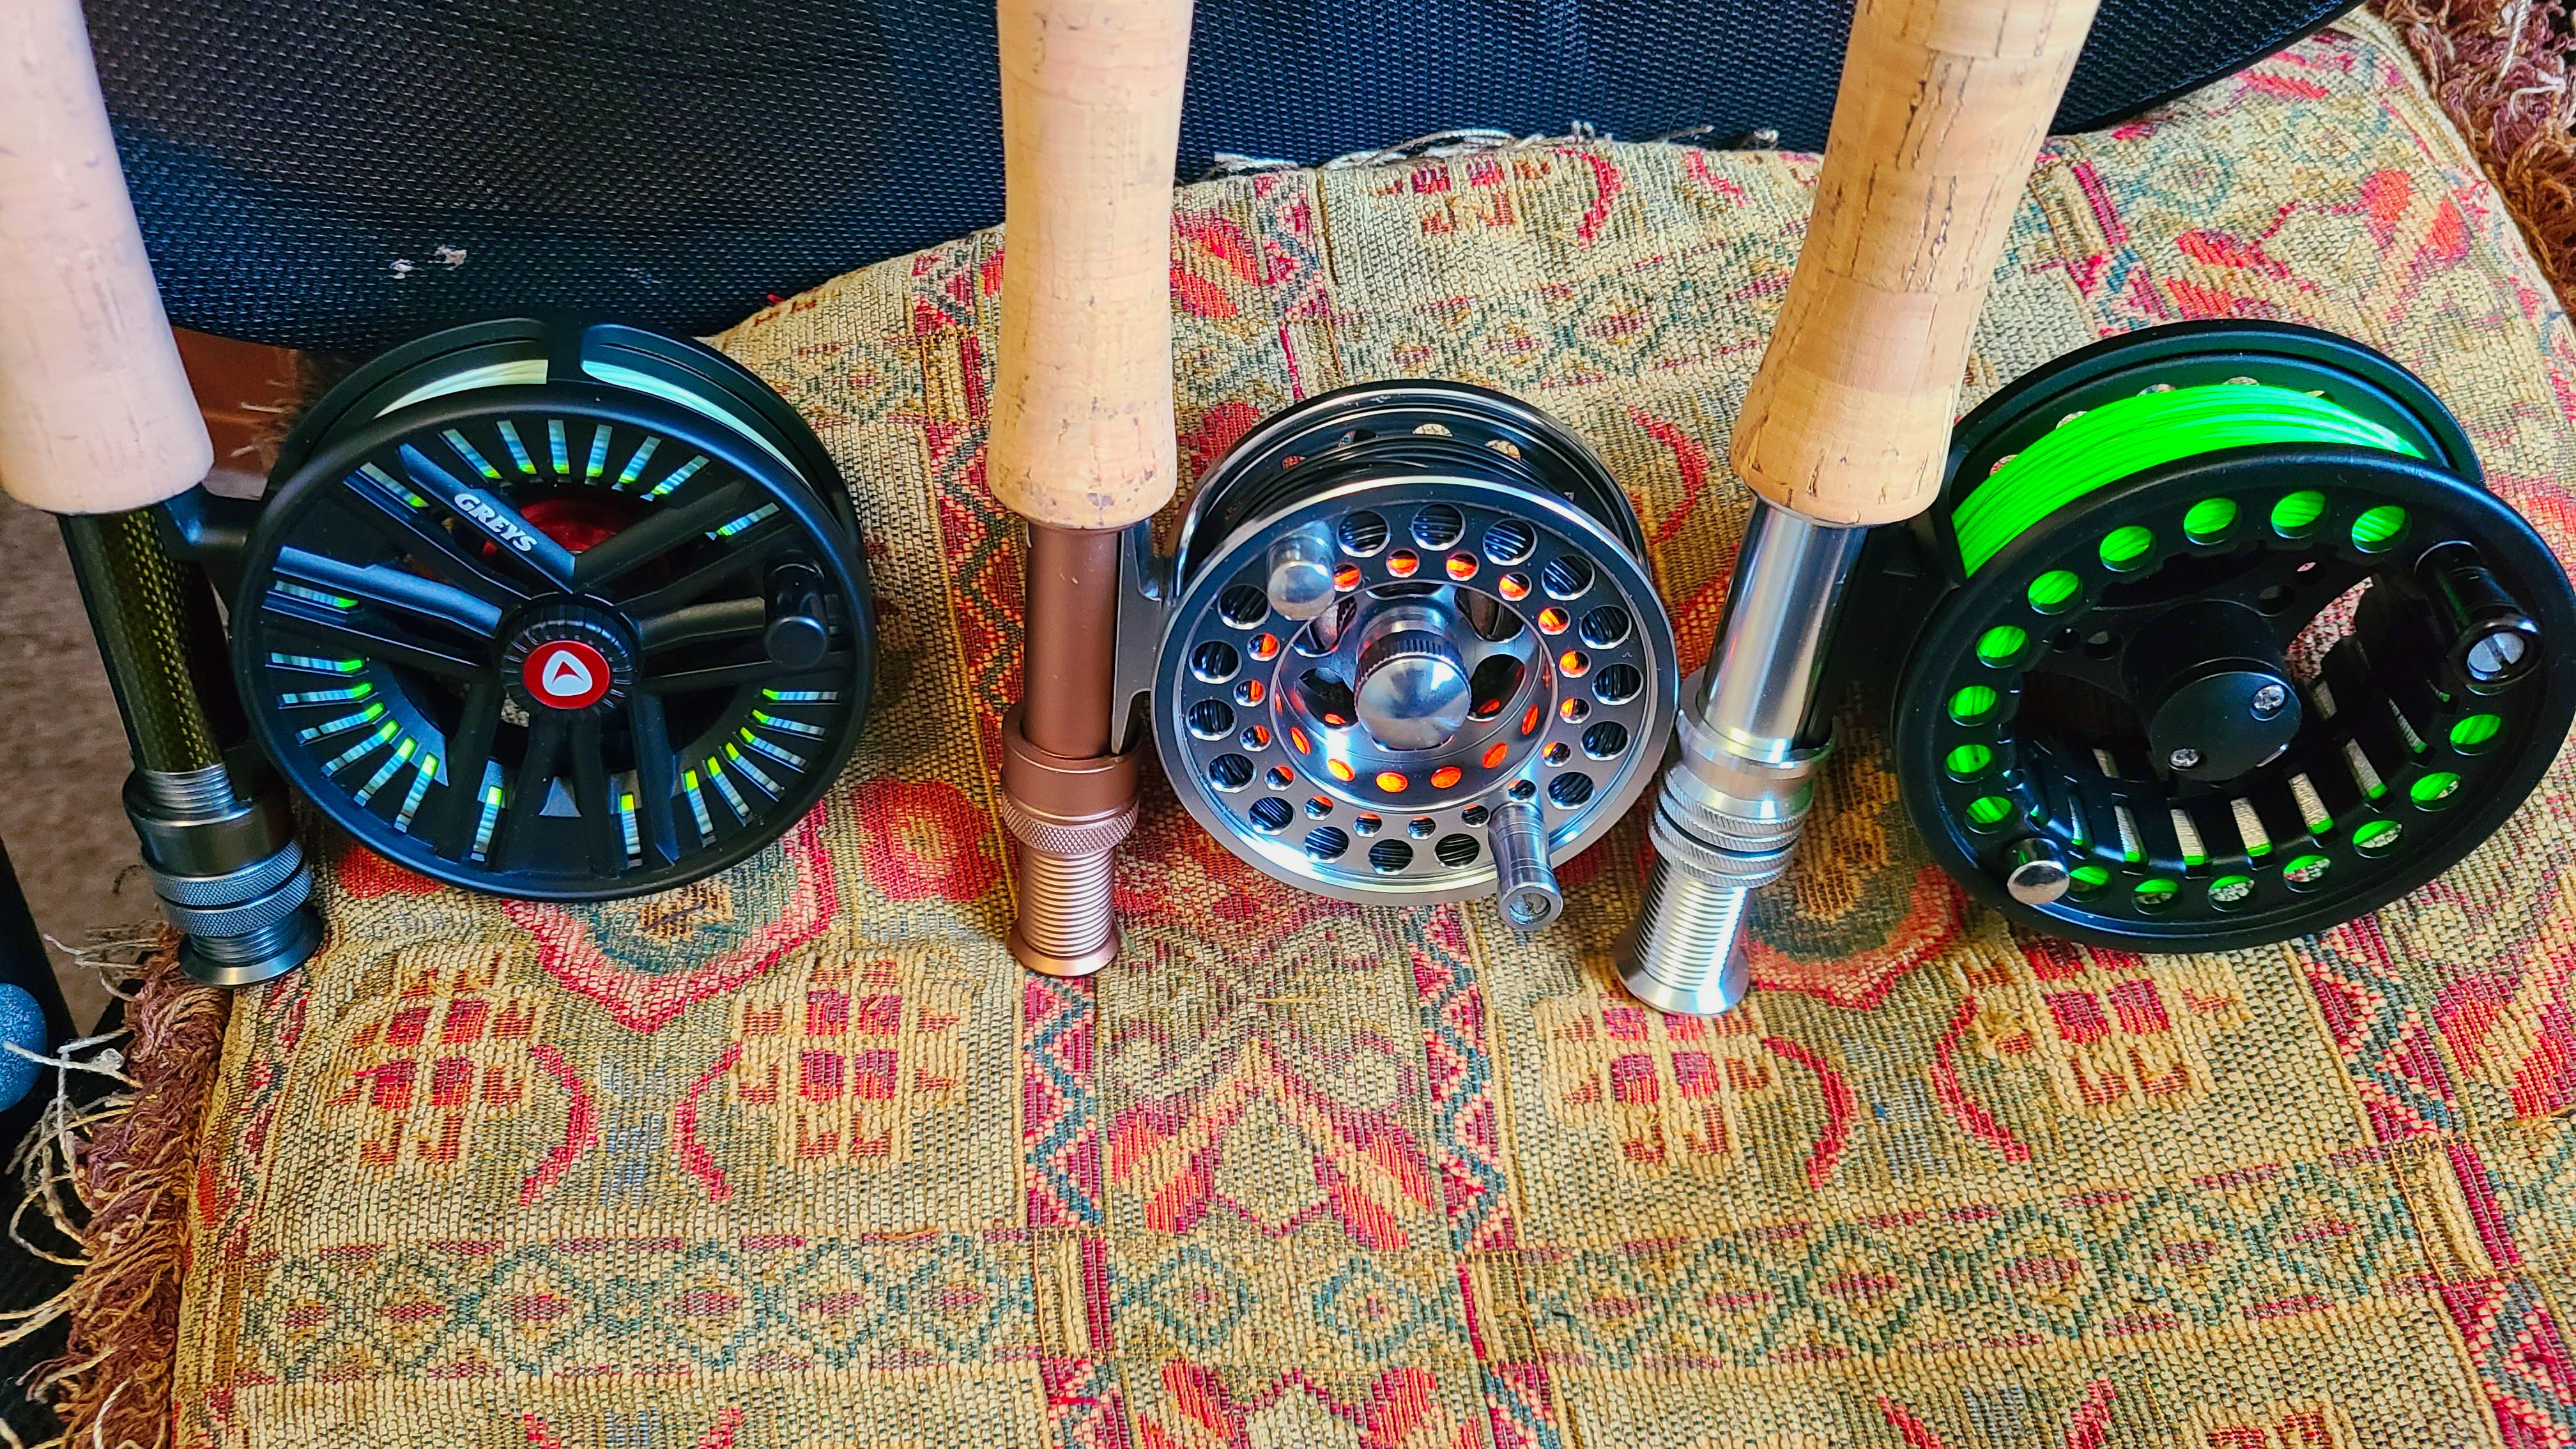 IS IT TIME TO GO FISHING YET?